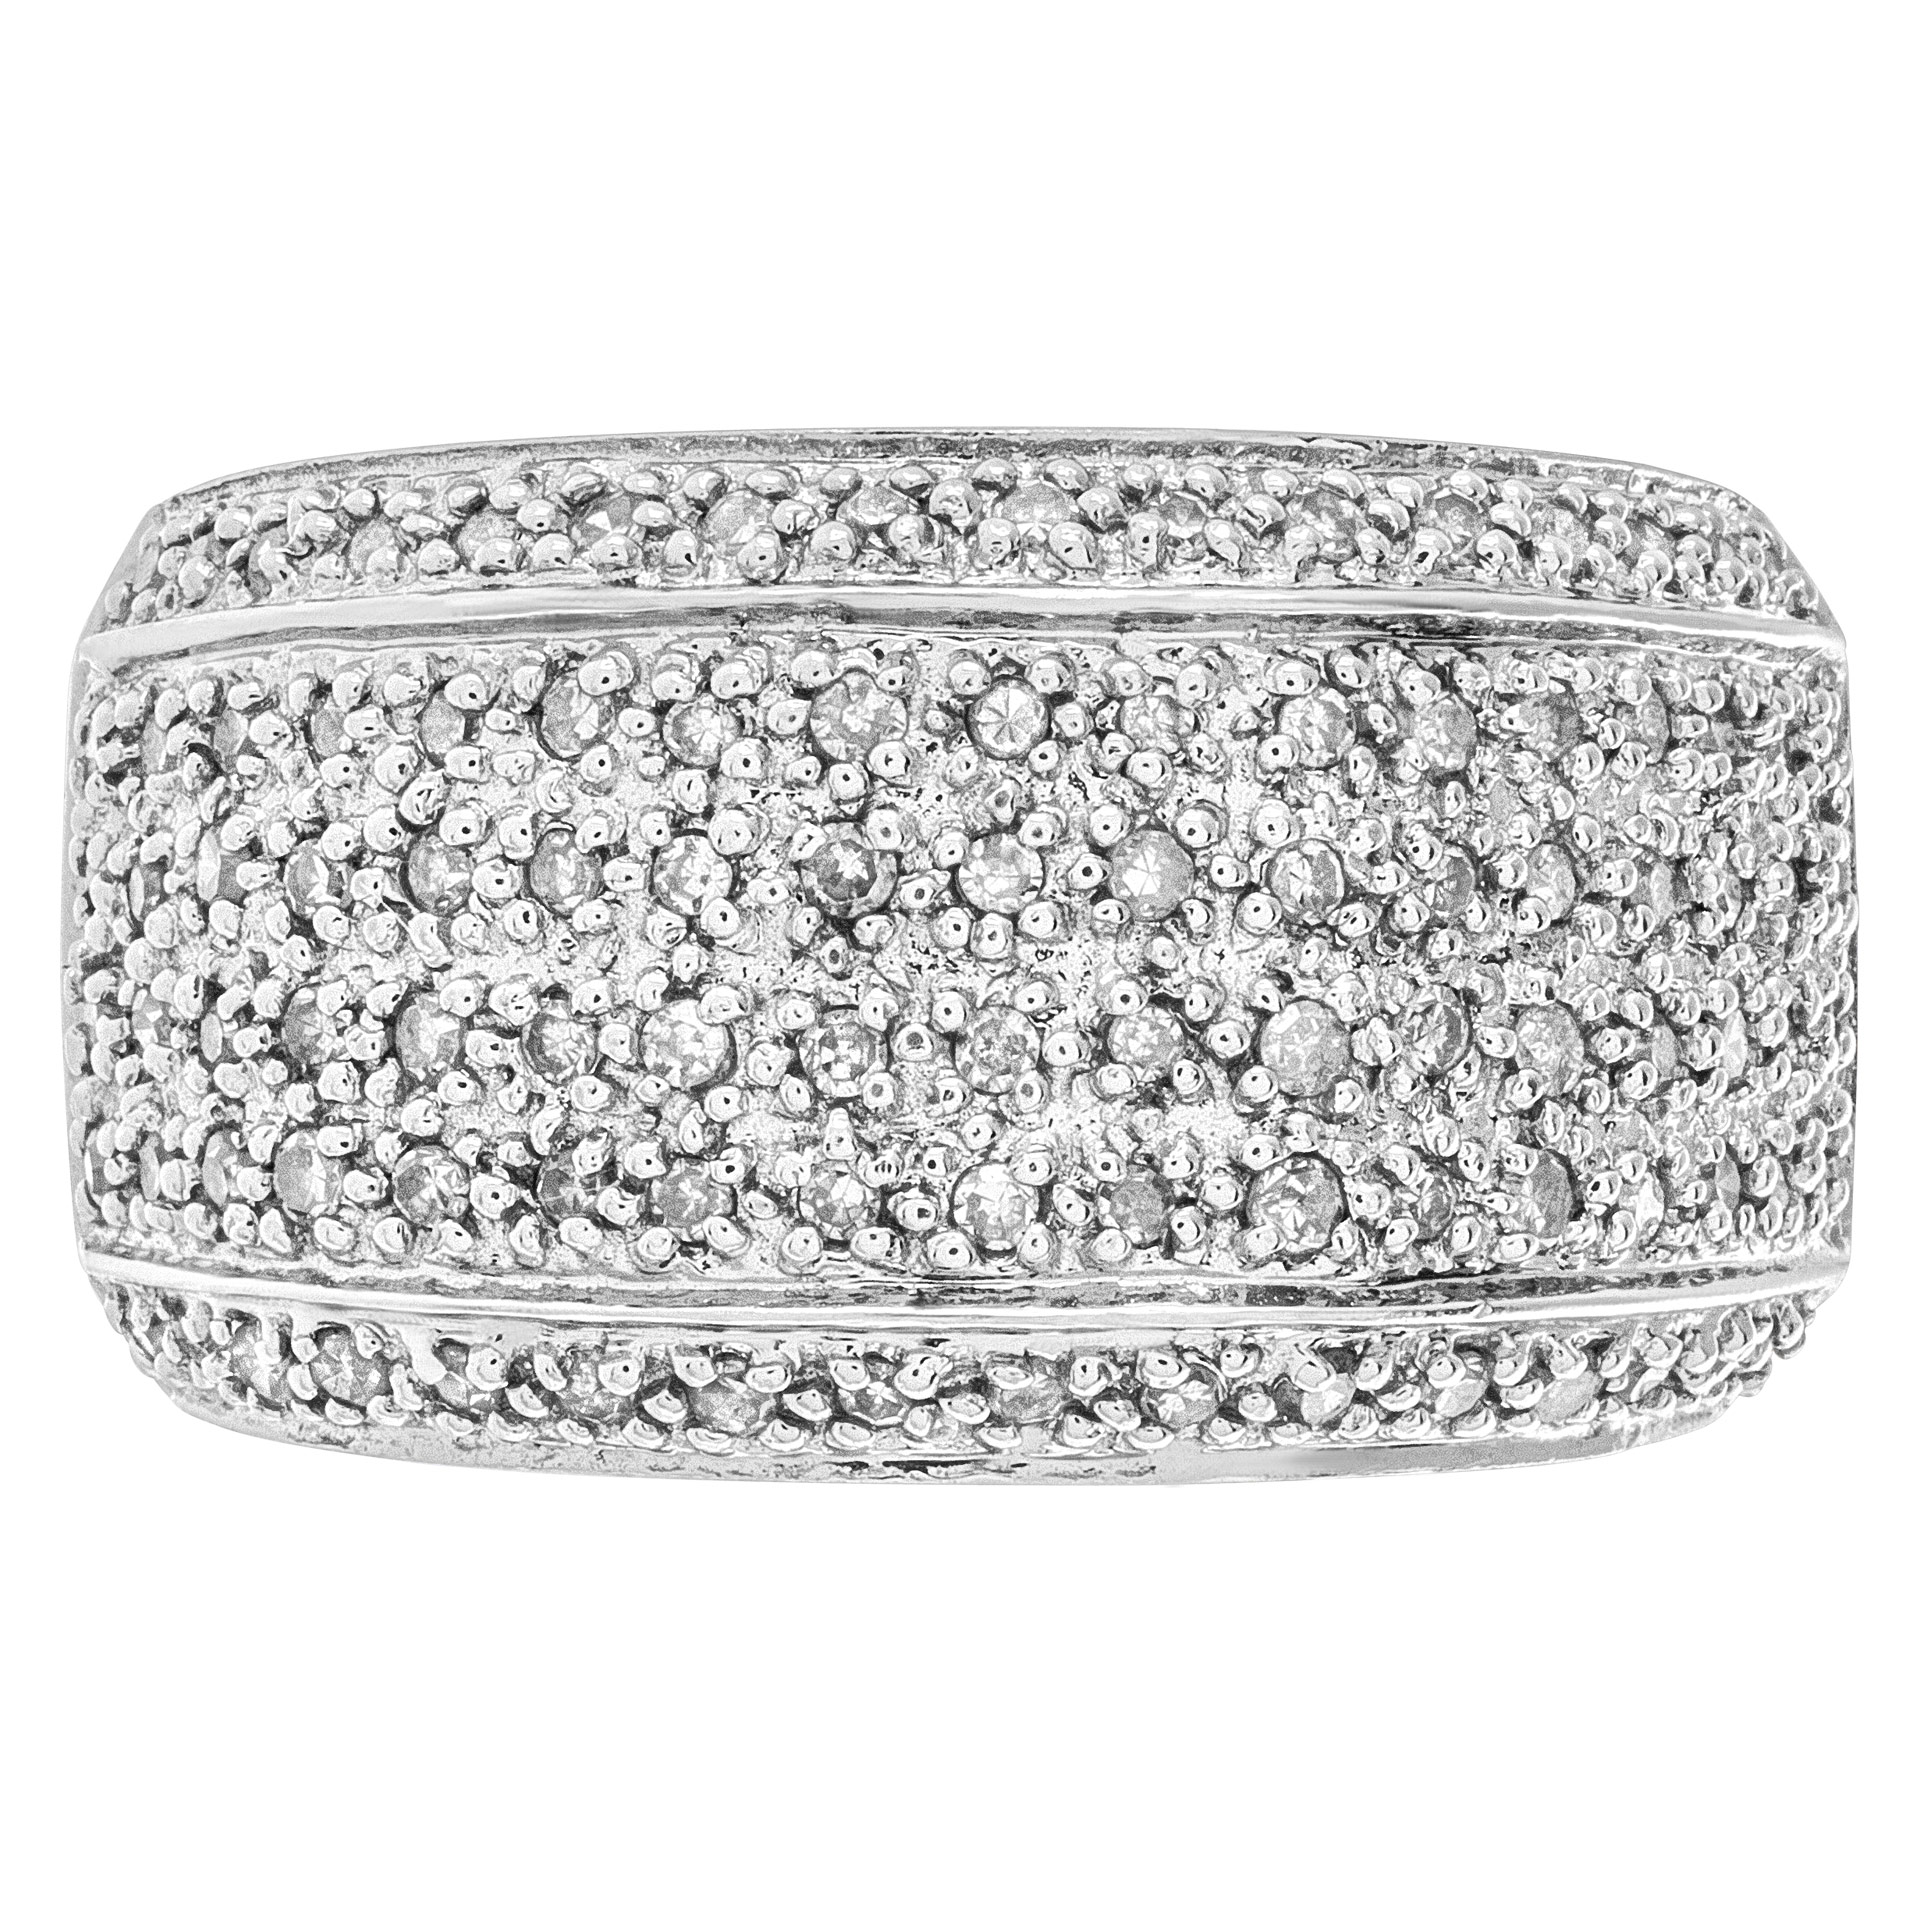 Pave Diamond Ring in 14k white gold with approx. 0.96 carats in diamonds